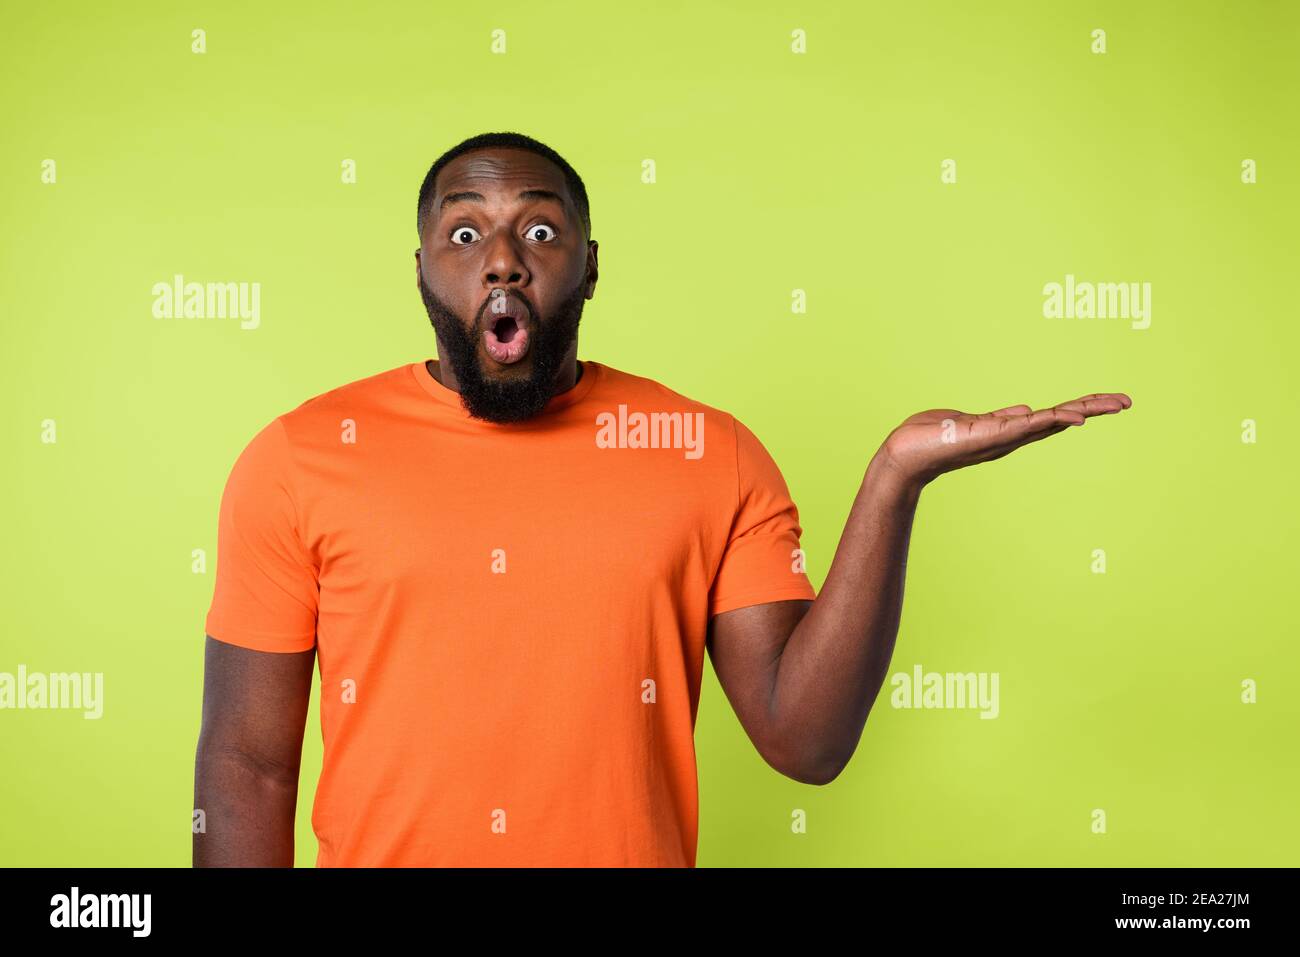 Surprised black man holds something in hand. Yellow background Stock Photo